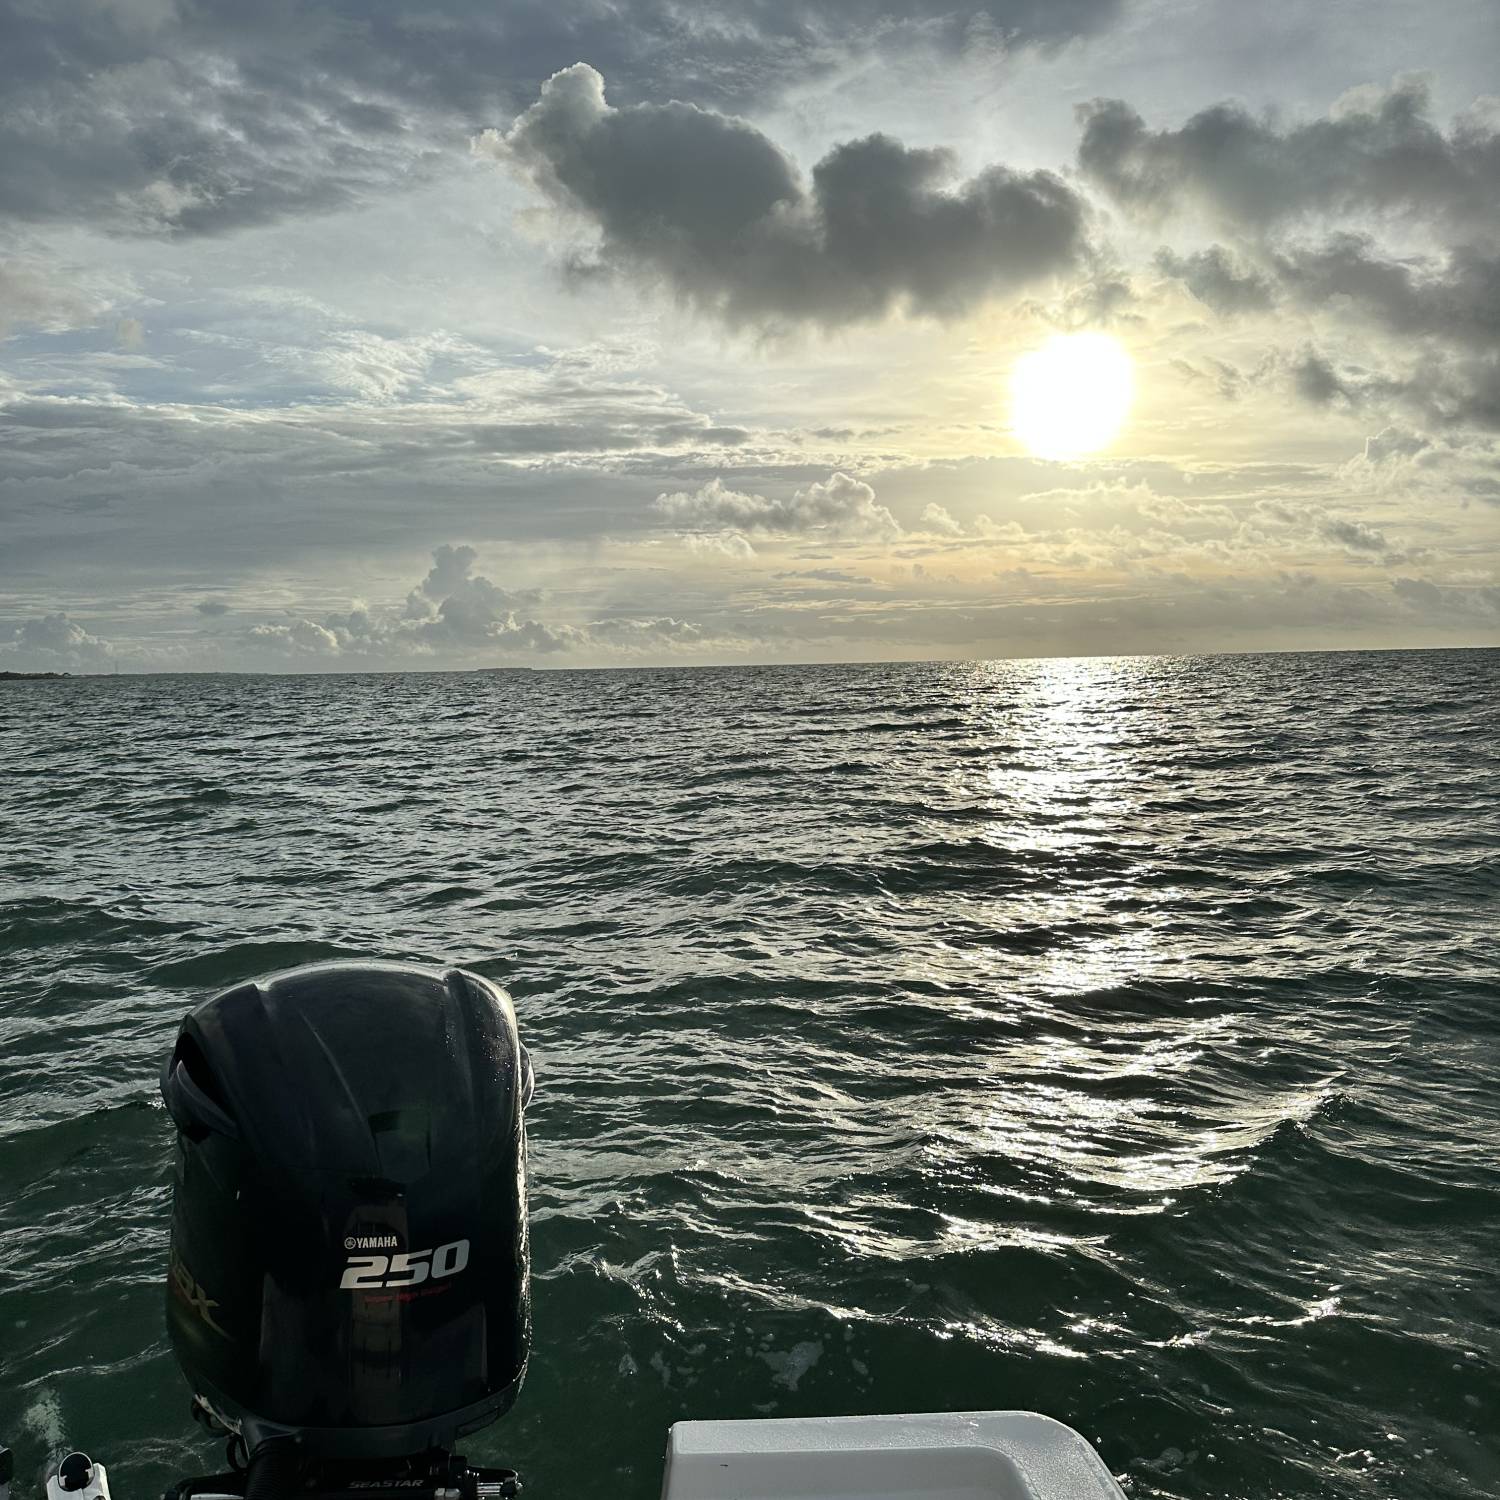 Day 1 of Spiny Lobster Season in the Florida Keys! Watched the sunrise from our 247 and eagerly waited to...